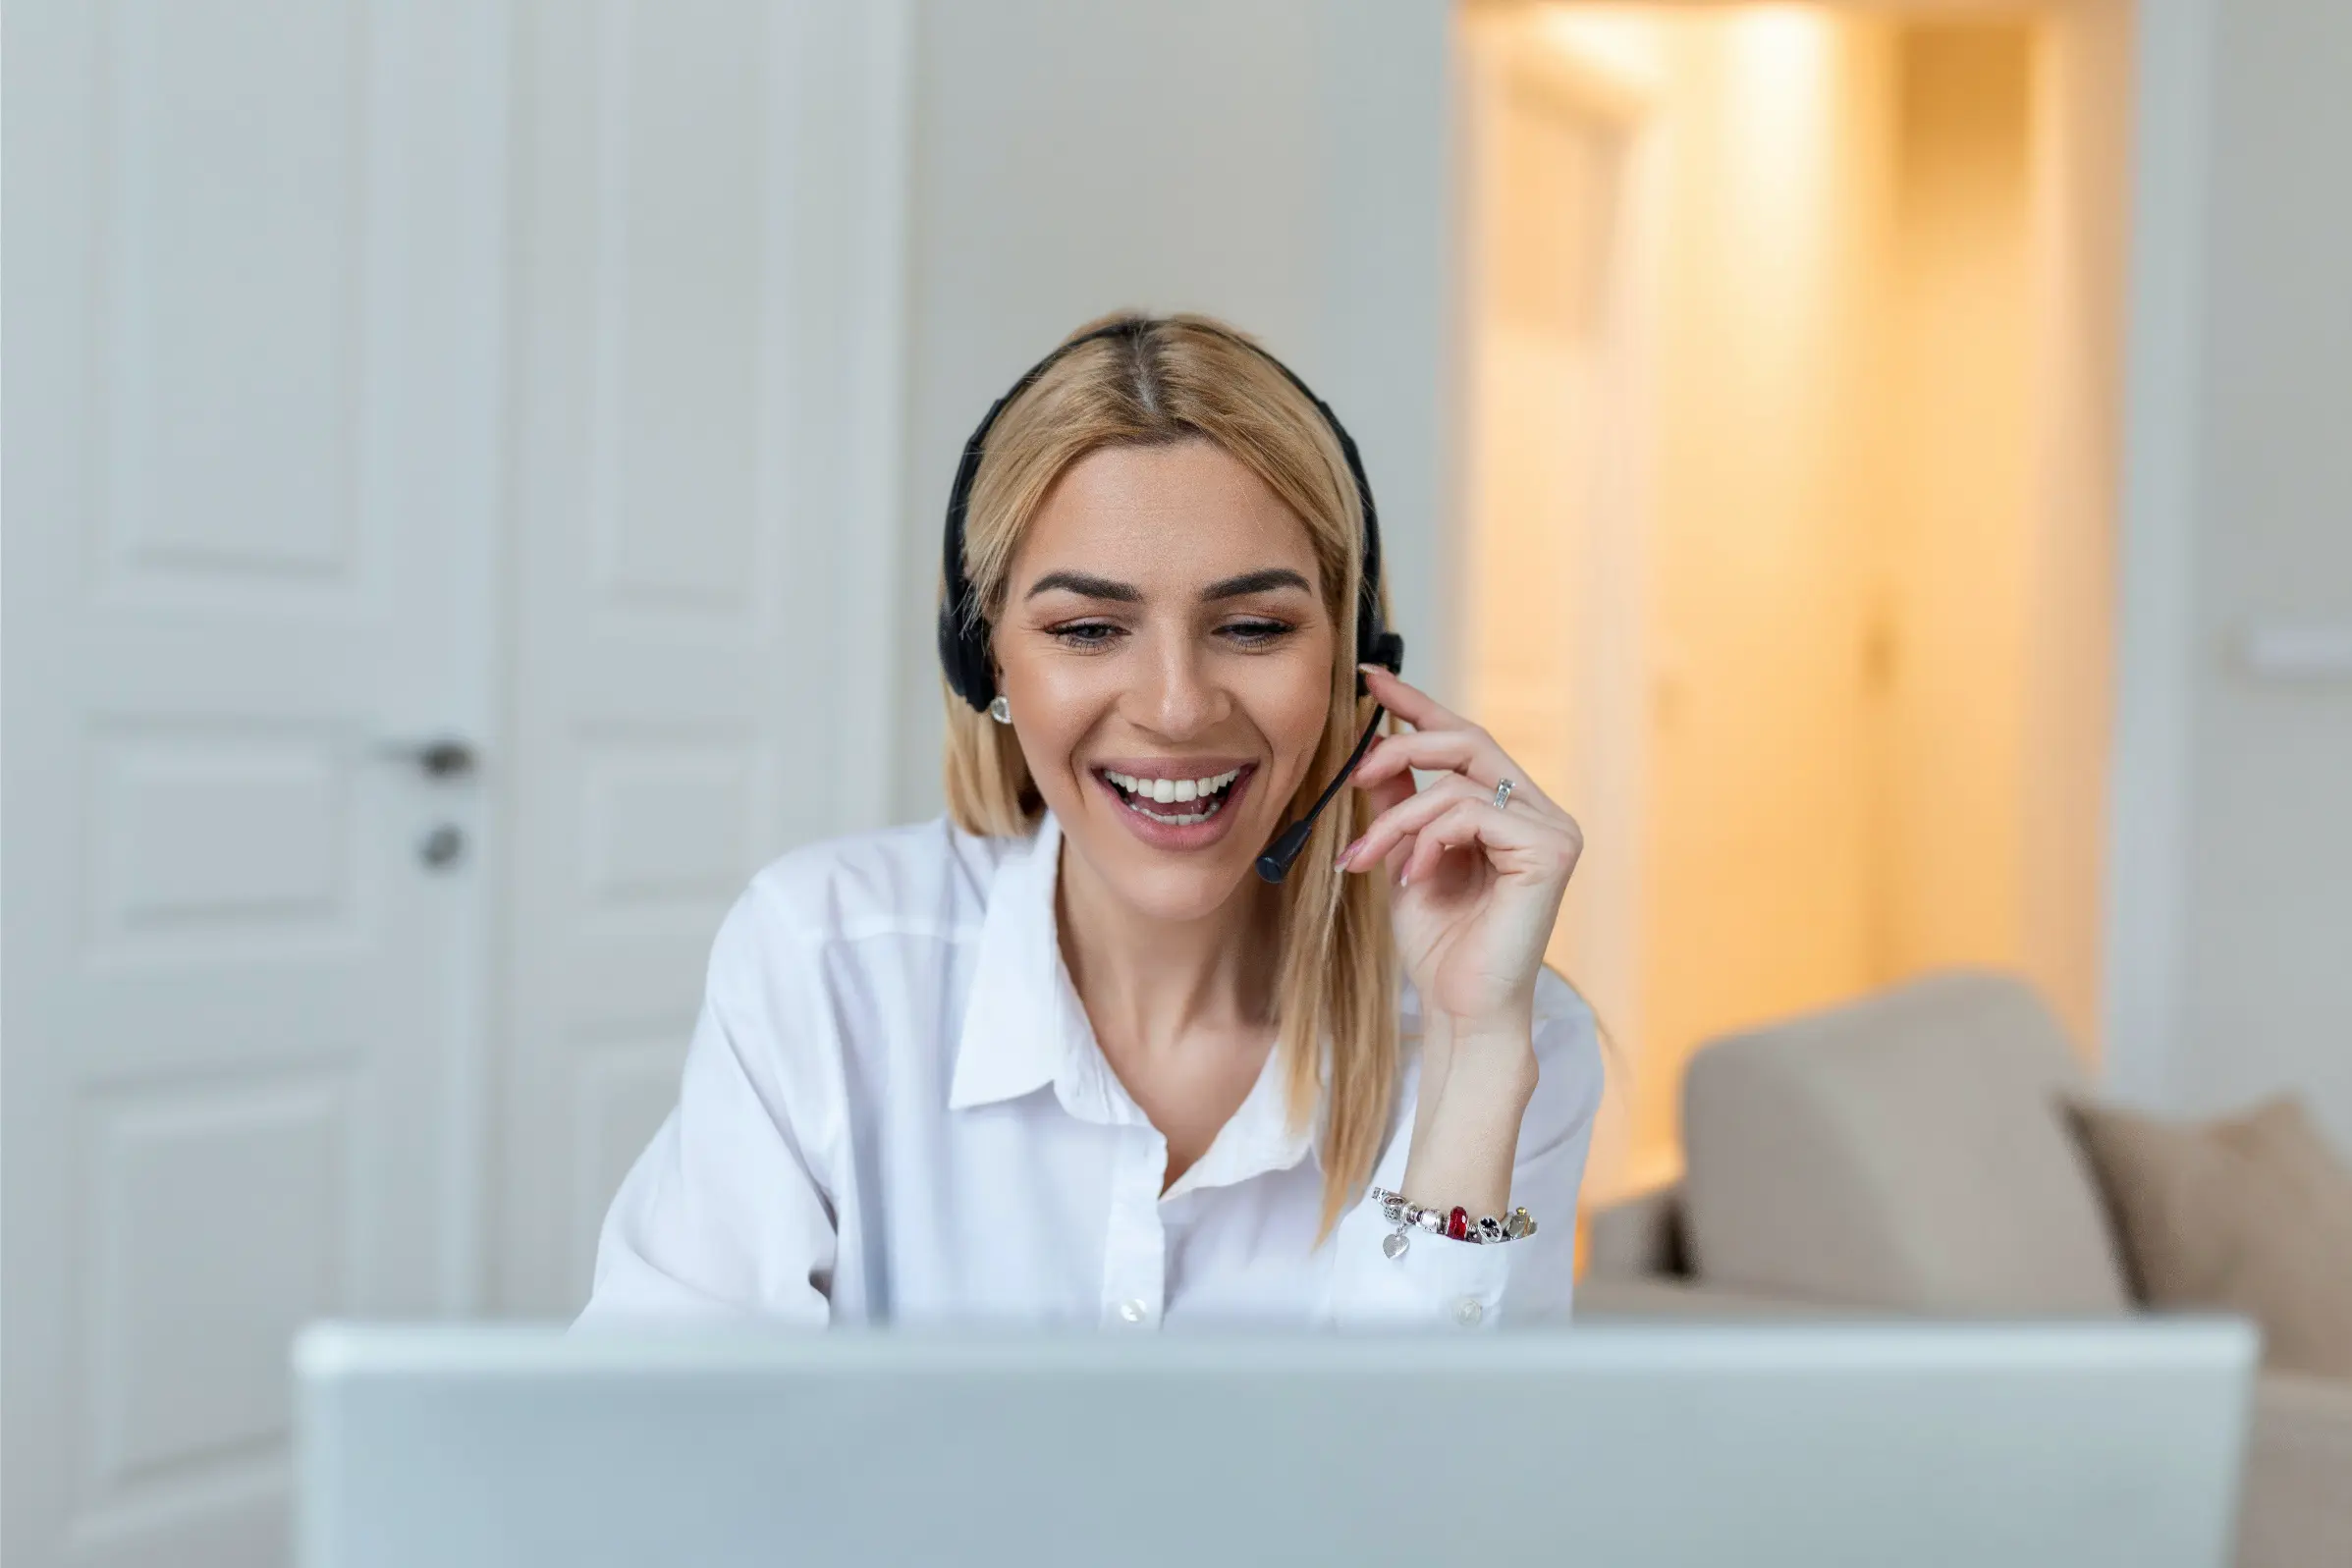 a smiling customer support agent with headset works on computer while supporting a customer on a phone call